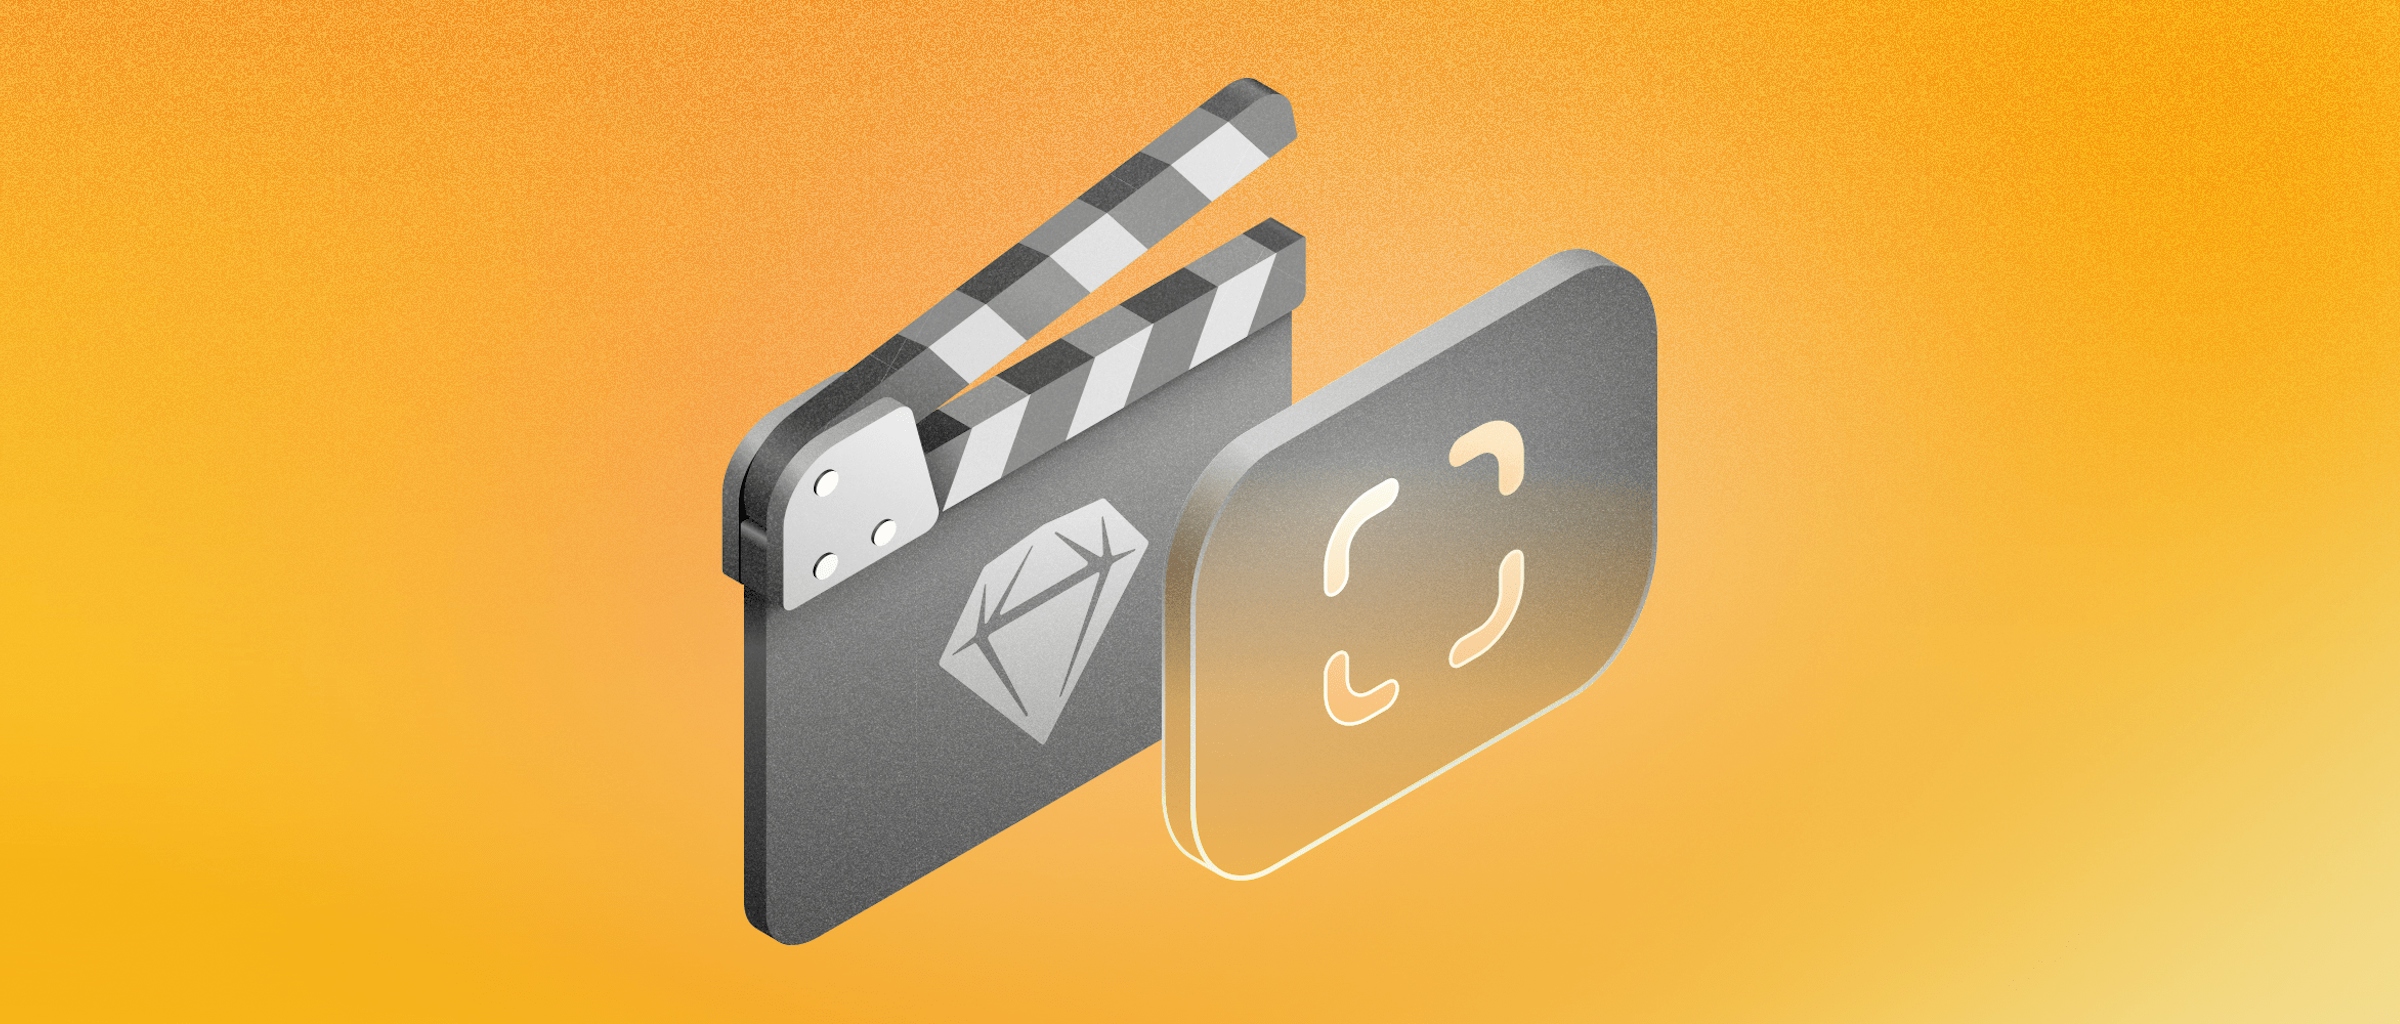 Image showing a Sketch clicker and the Corners icon over a yellow background.